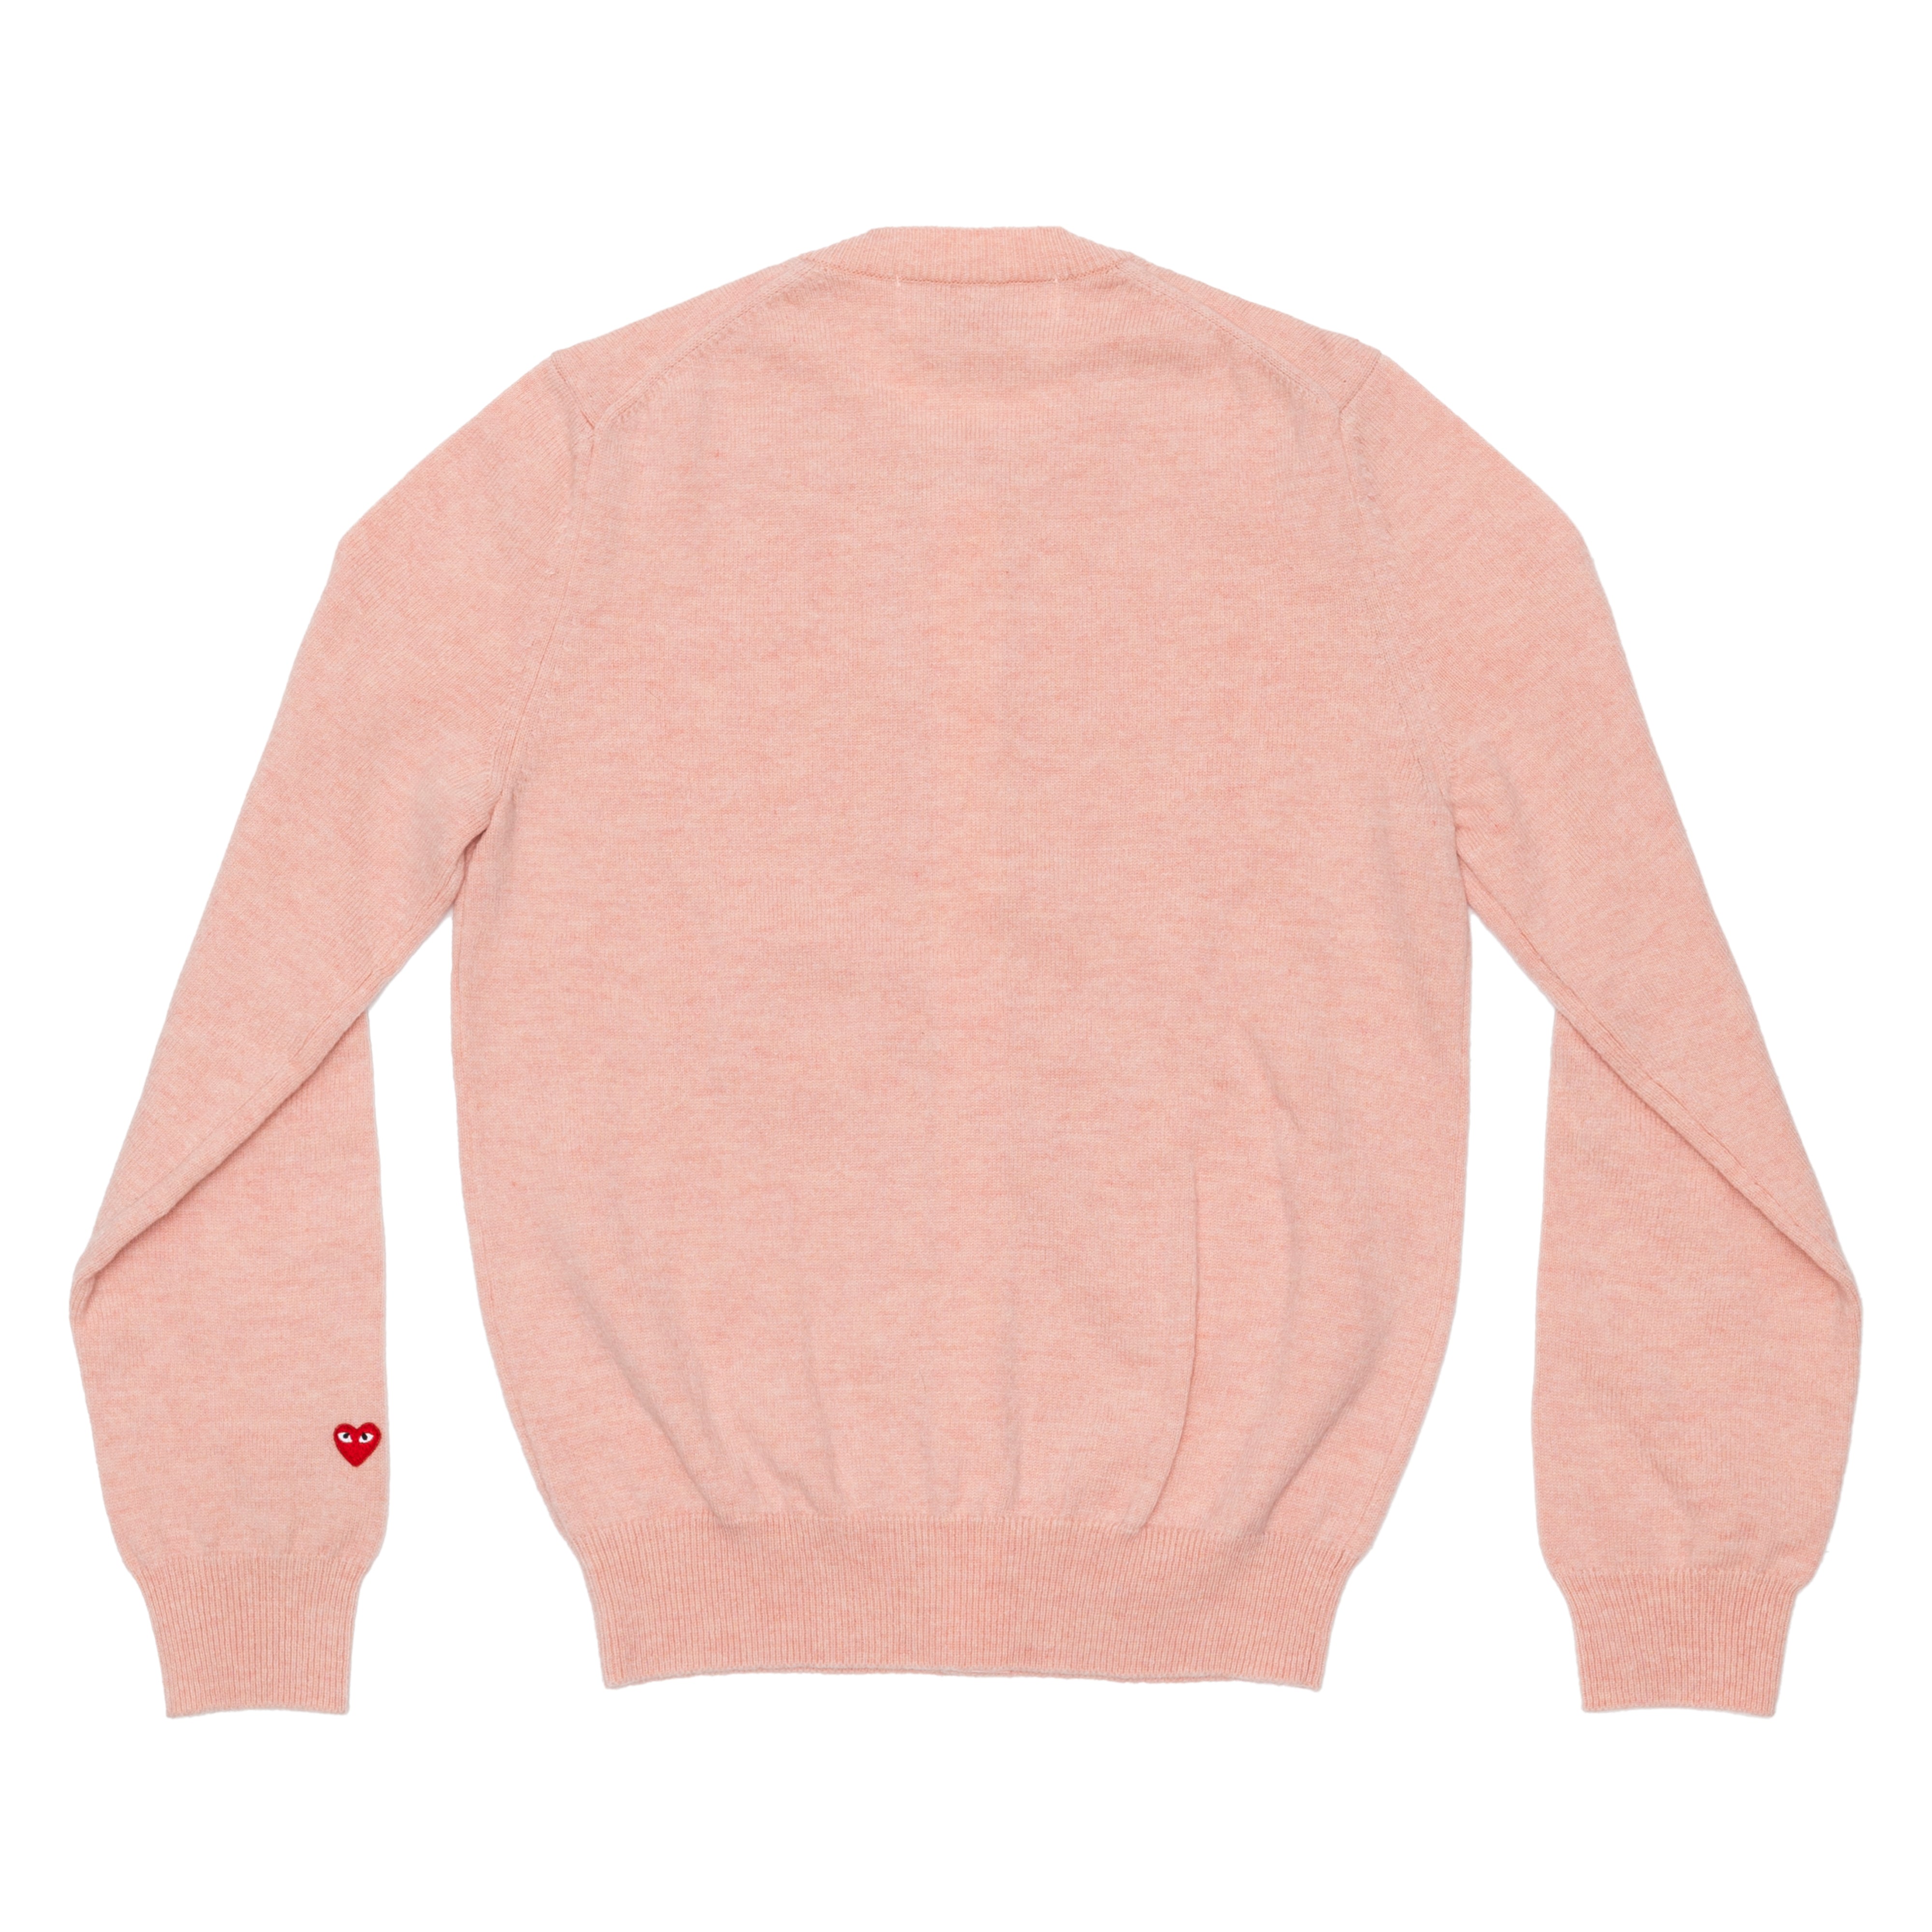 PLAY CDG - Top Dyed Carded Lambswool Women's Cardigan - (Pink)